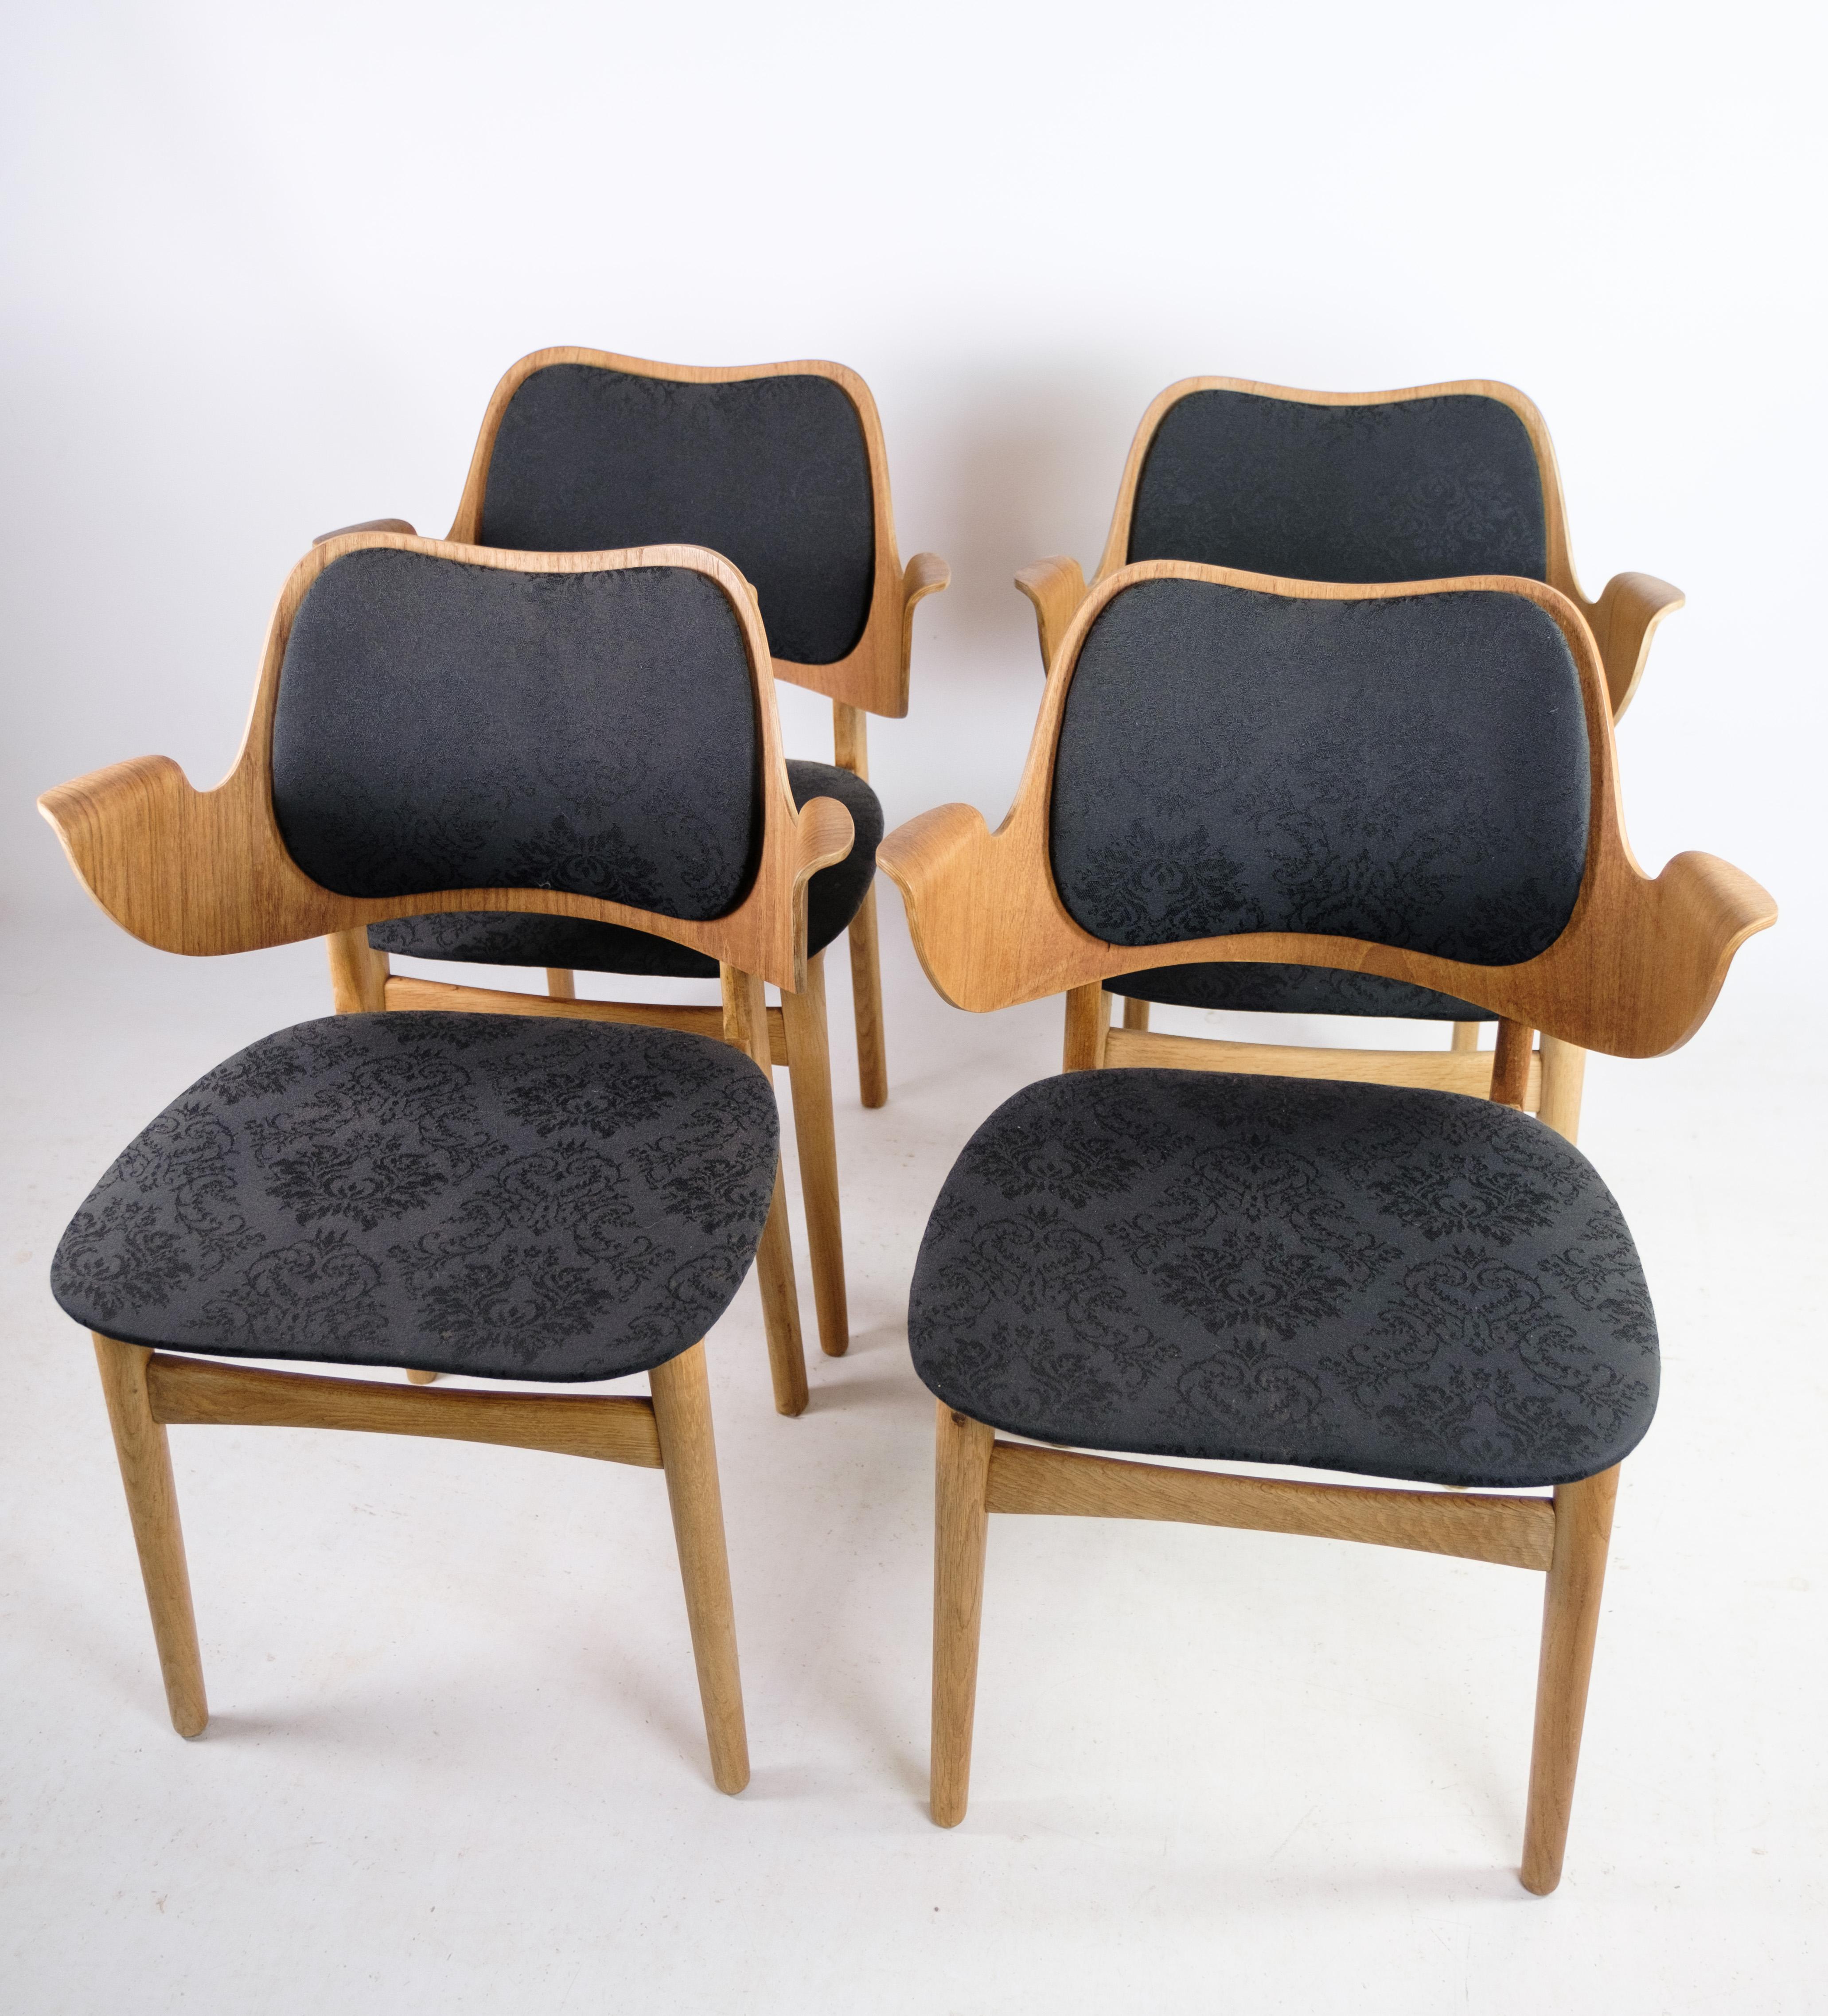 This set of four armchairs, model 107, designed by Hans Olsen for Bramin around the 1960s, showcases the iconic Danish design aesthetic of the era. Crafted from a combination of oak and teak, these chairs exemplify the natural beauty and durability